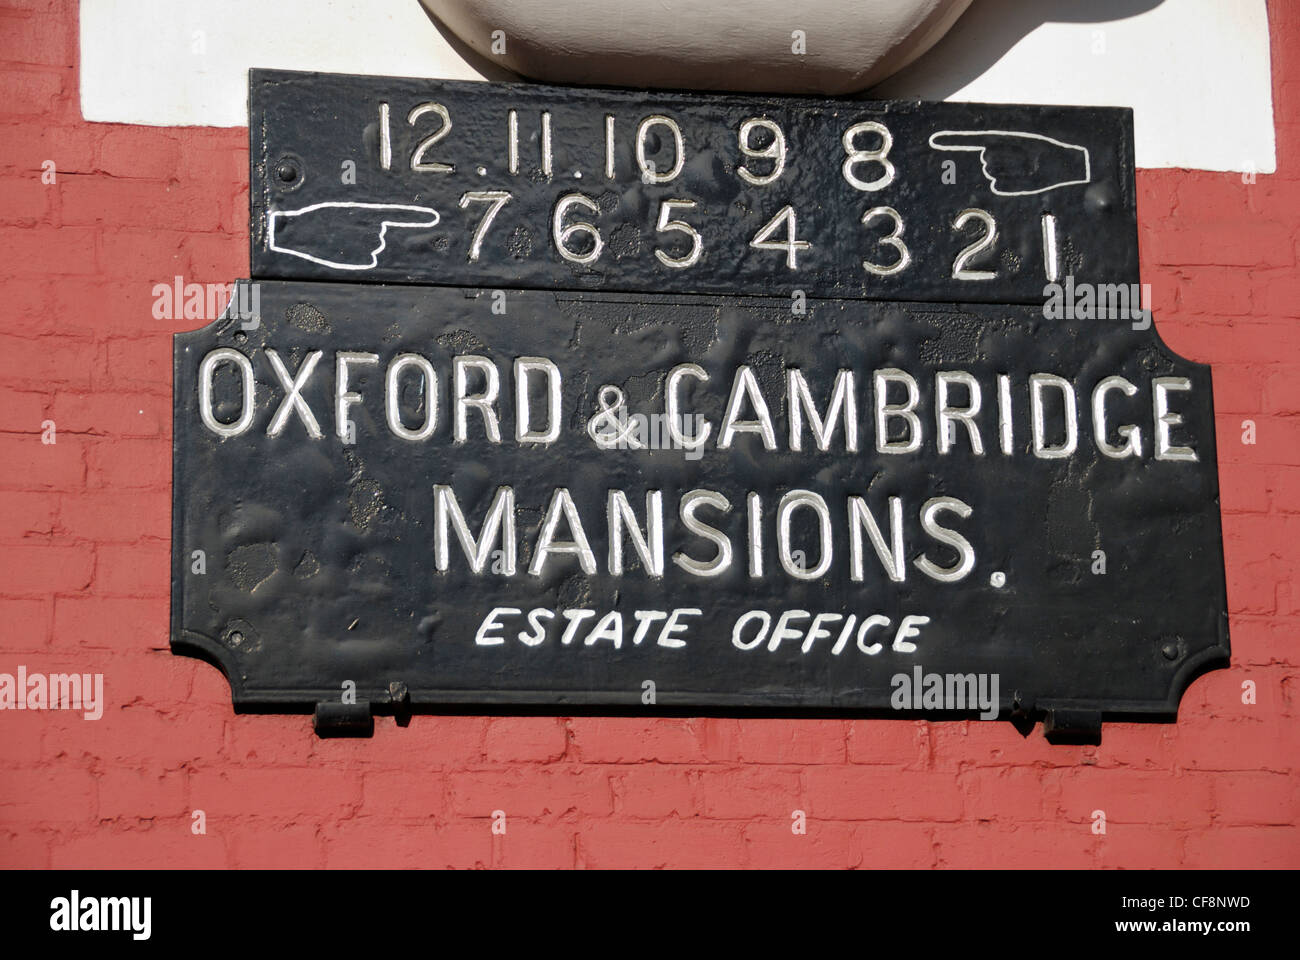 Oxford and Cambridge Mansions sign, London, England Stock Photo